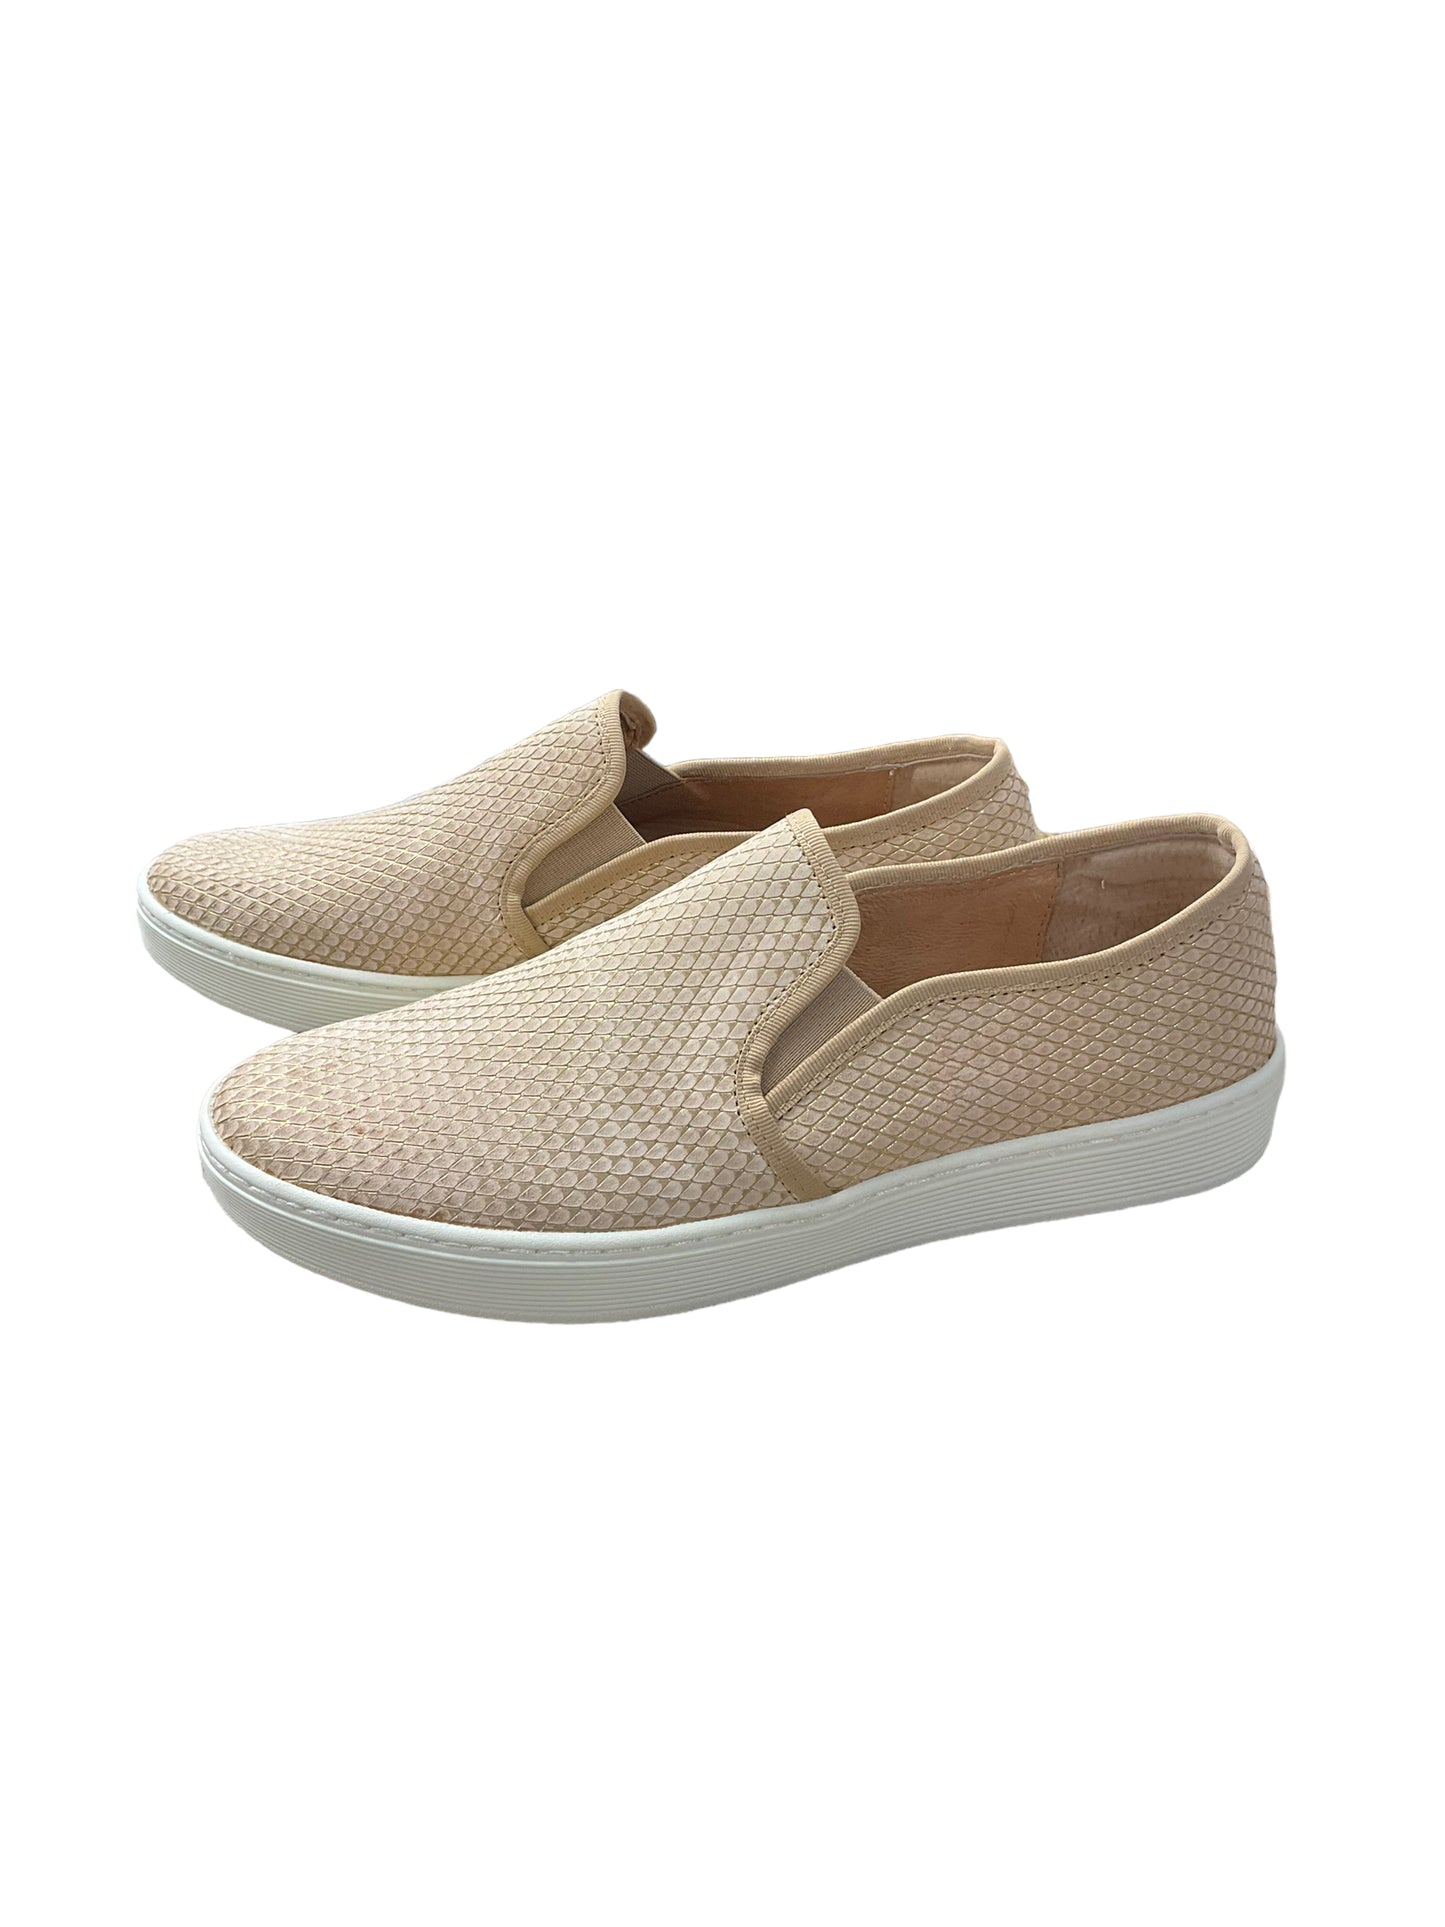 Shoes Flats Boat By Sofft  Size: 11